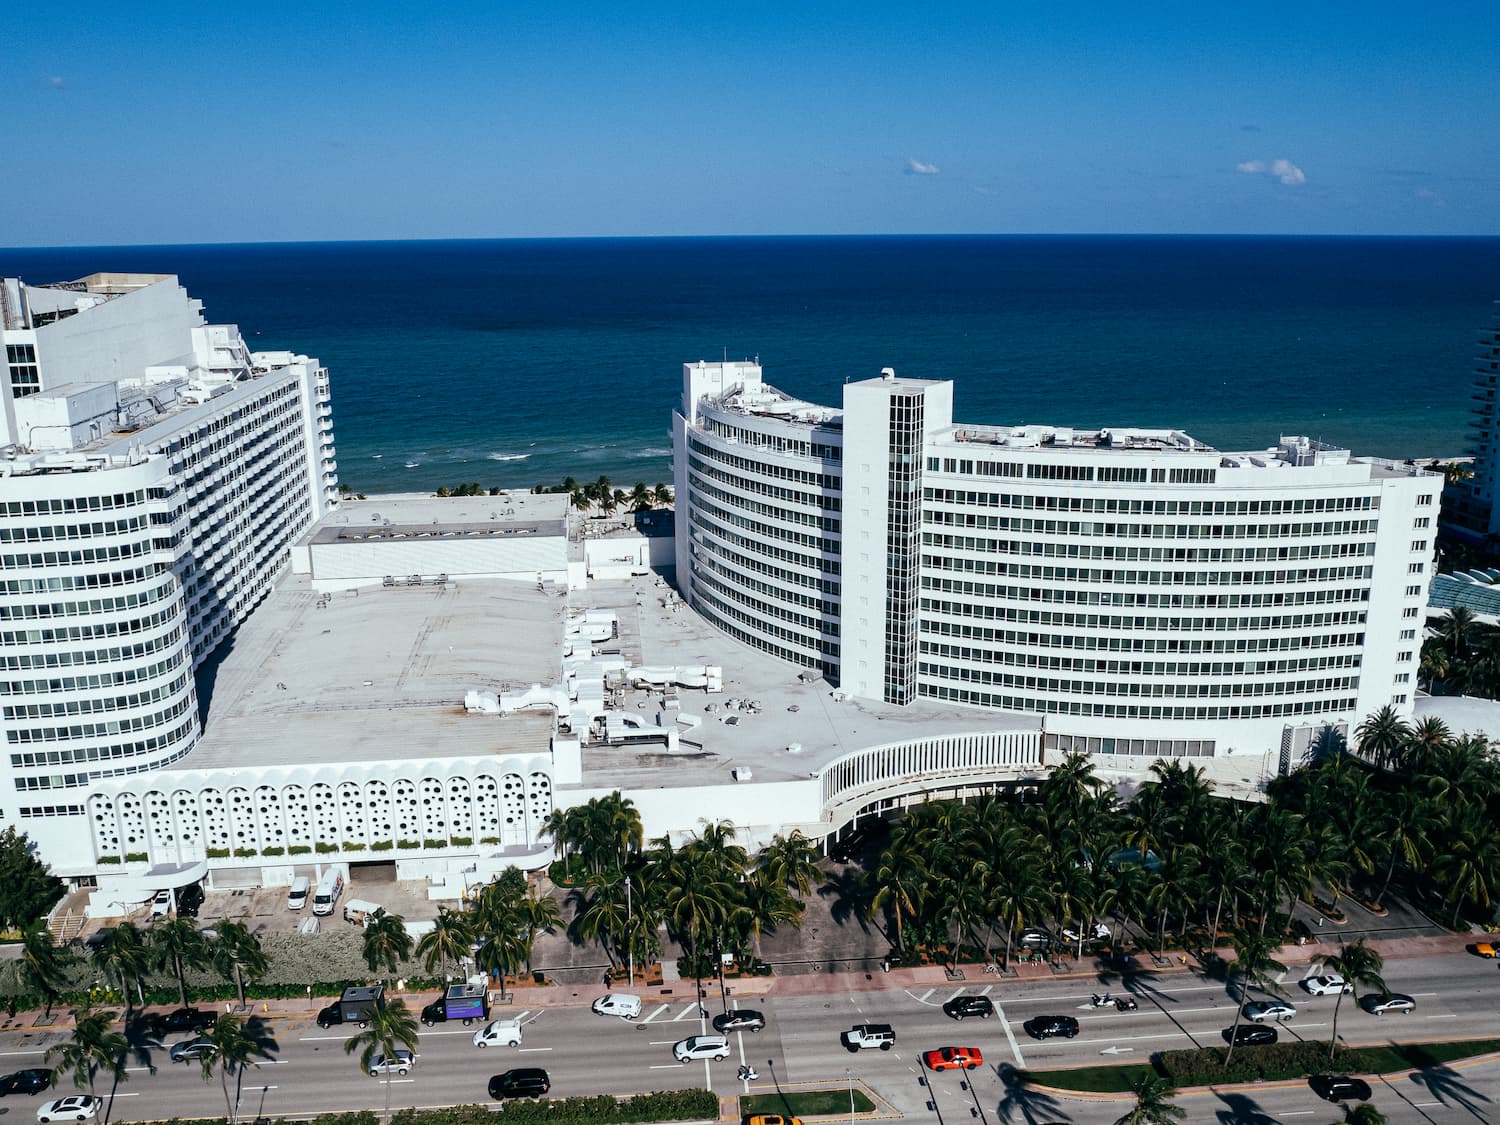 The Fontainebleau